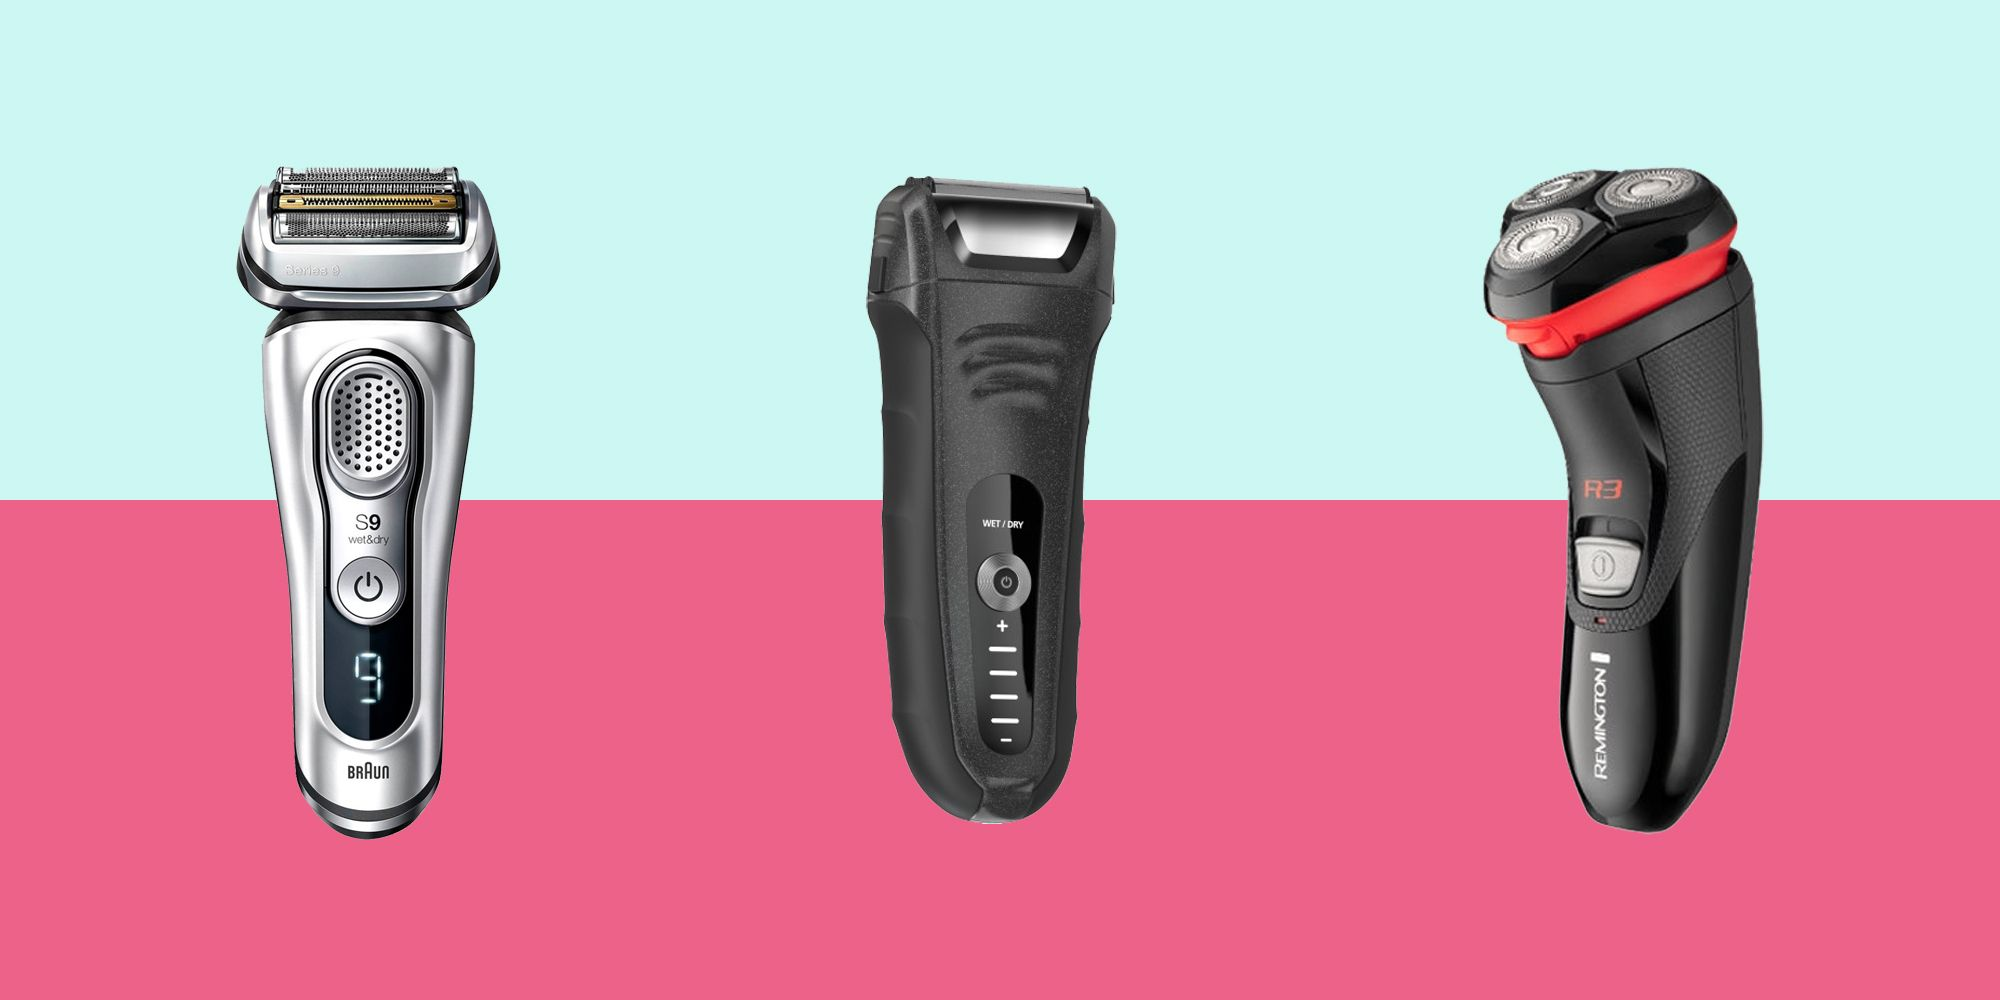 braun vs philips electric shavers with shaving cream, foil and rotary shavers, and wet dry shaving for most electric razors